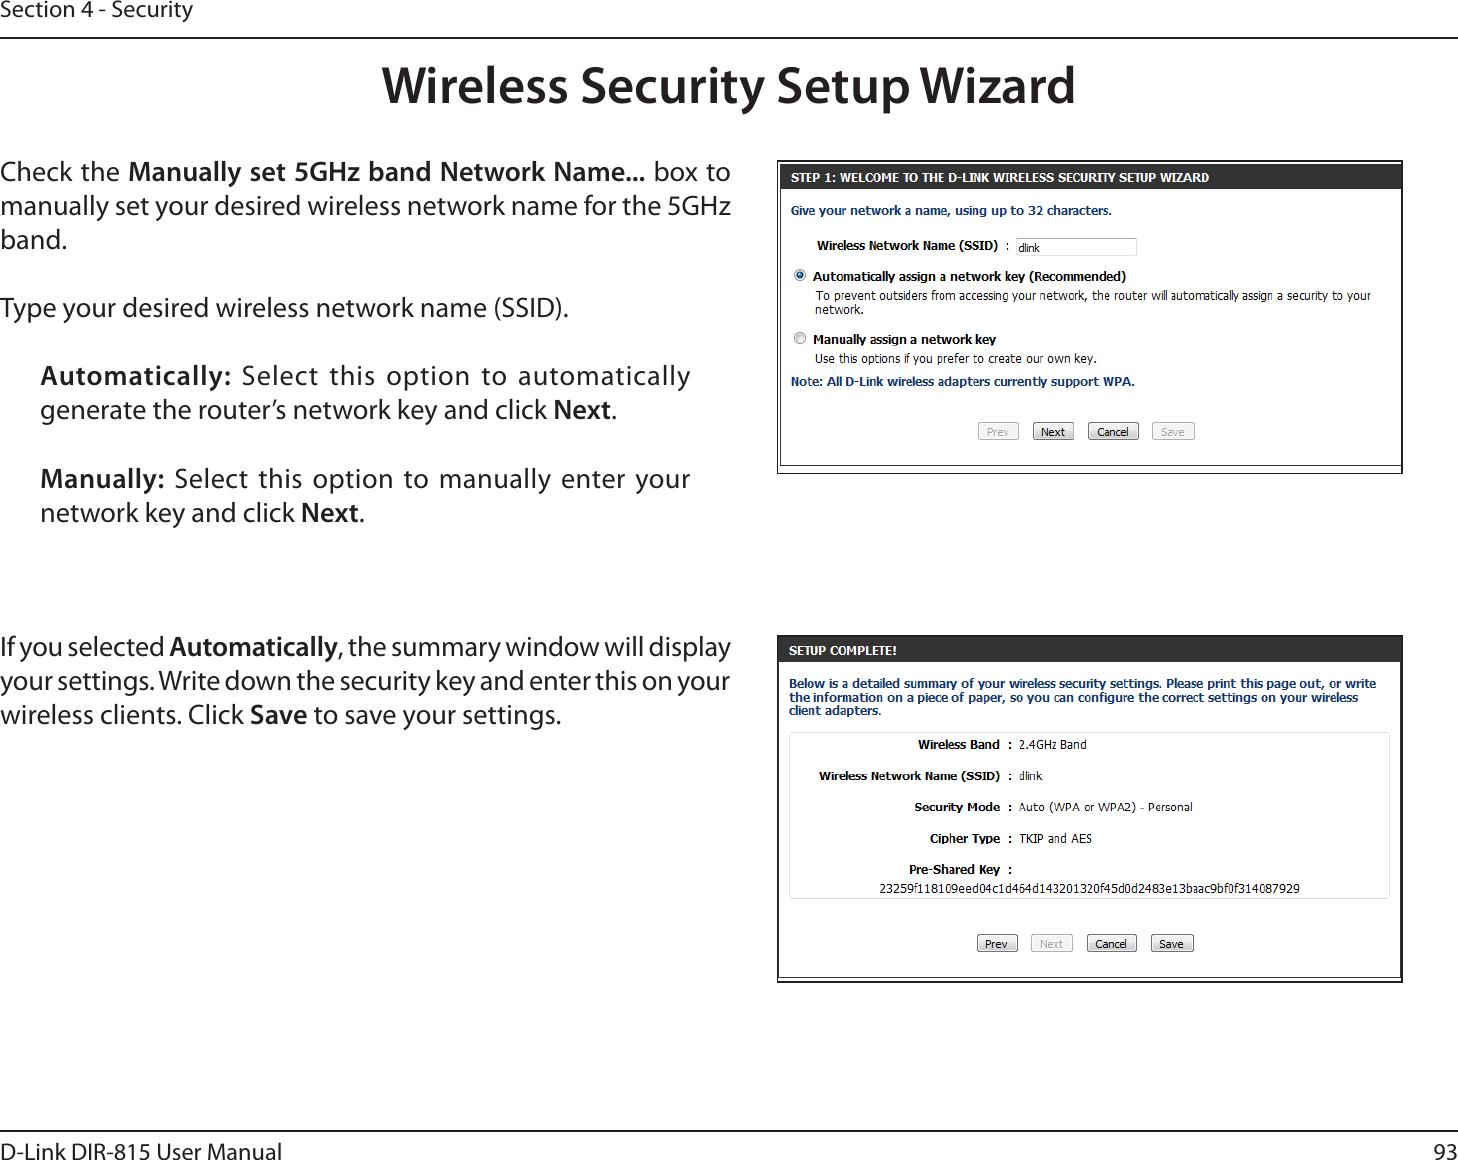 93D-Link DIR-815 User ManualSection 4 - SecurityWireless Security Setup WizardCheck the .BOVBMMZTFU()[CBOE/FUXPSL/BNF box to manually set your desired wireless network name for the 5GHz band.Type your desired wireless network name (SSID). Automatically:  Select this option to automatically generate the router’s network key and click /FYU.Manually: Select this option to manually enter your network key and click /FYU.If you selected Automatically, the summary window will display your settings. Write down the security key and enter this on your wireless clients. Click Save to save your settings.